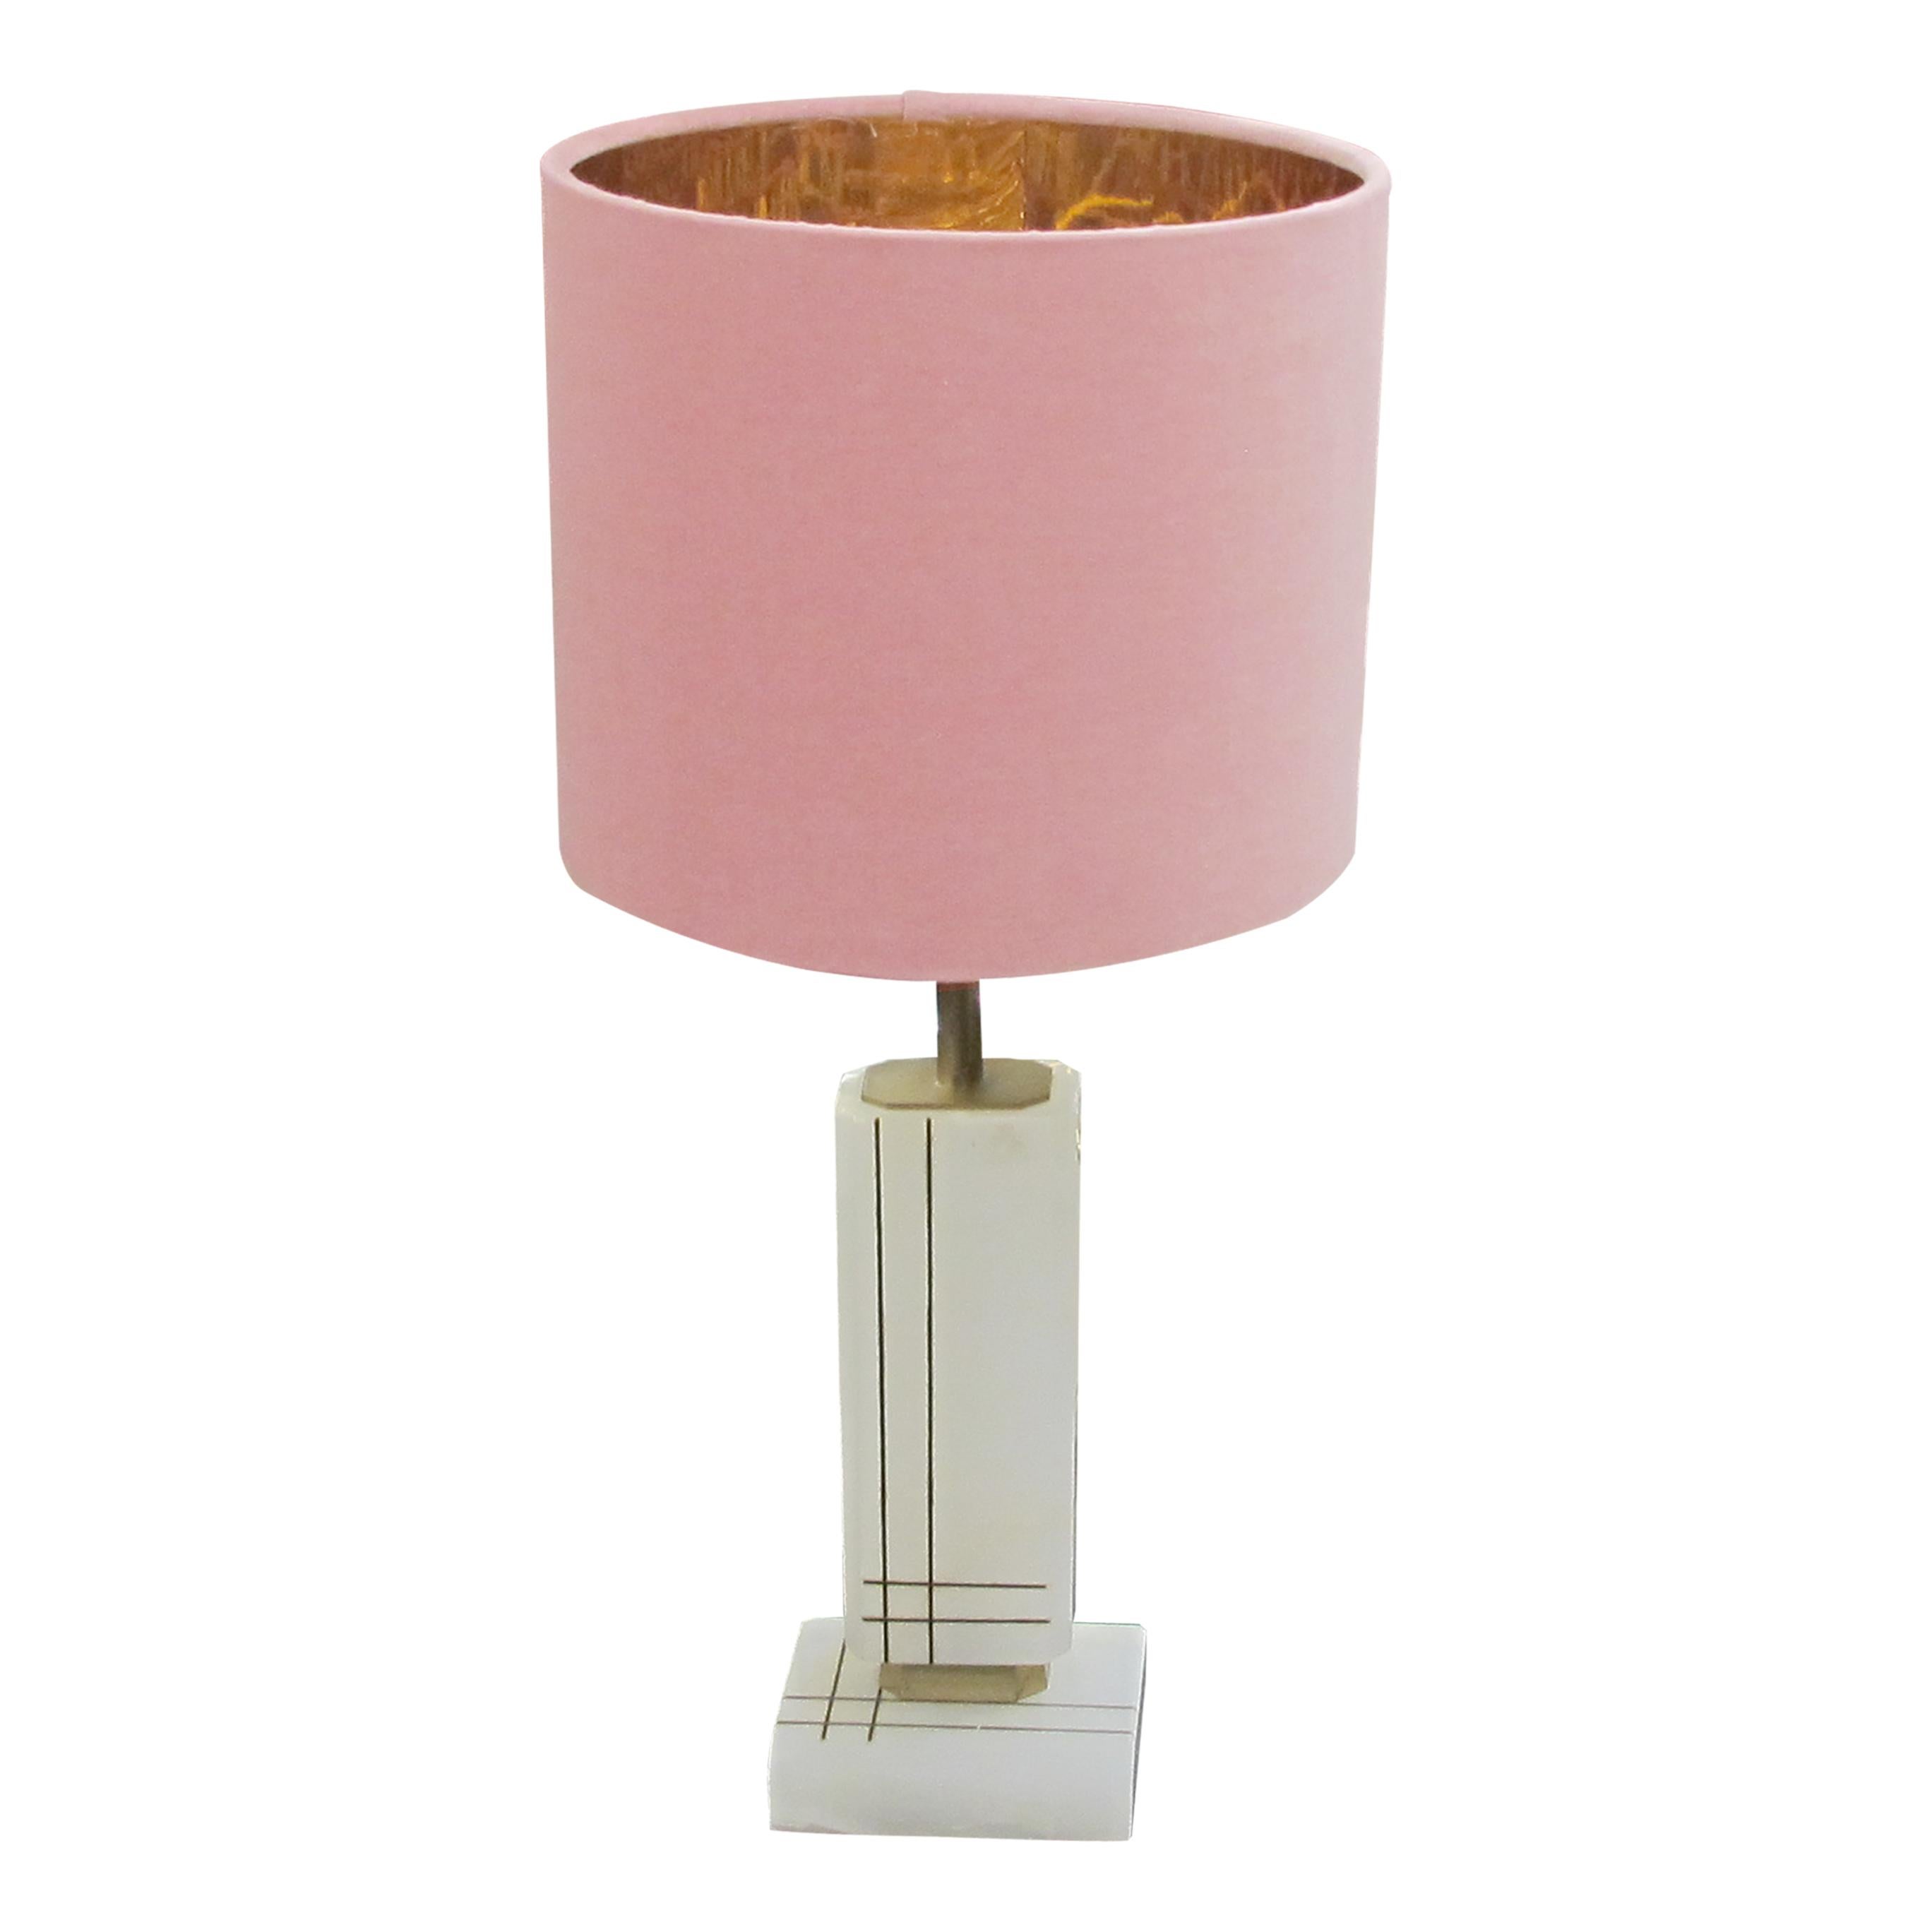 Mid-Century Modern Pair of White Onyx Structural Table Lamps with Pink Shades, Italian 1960s For Sale